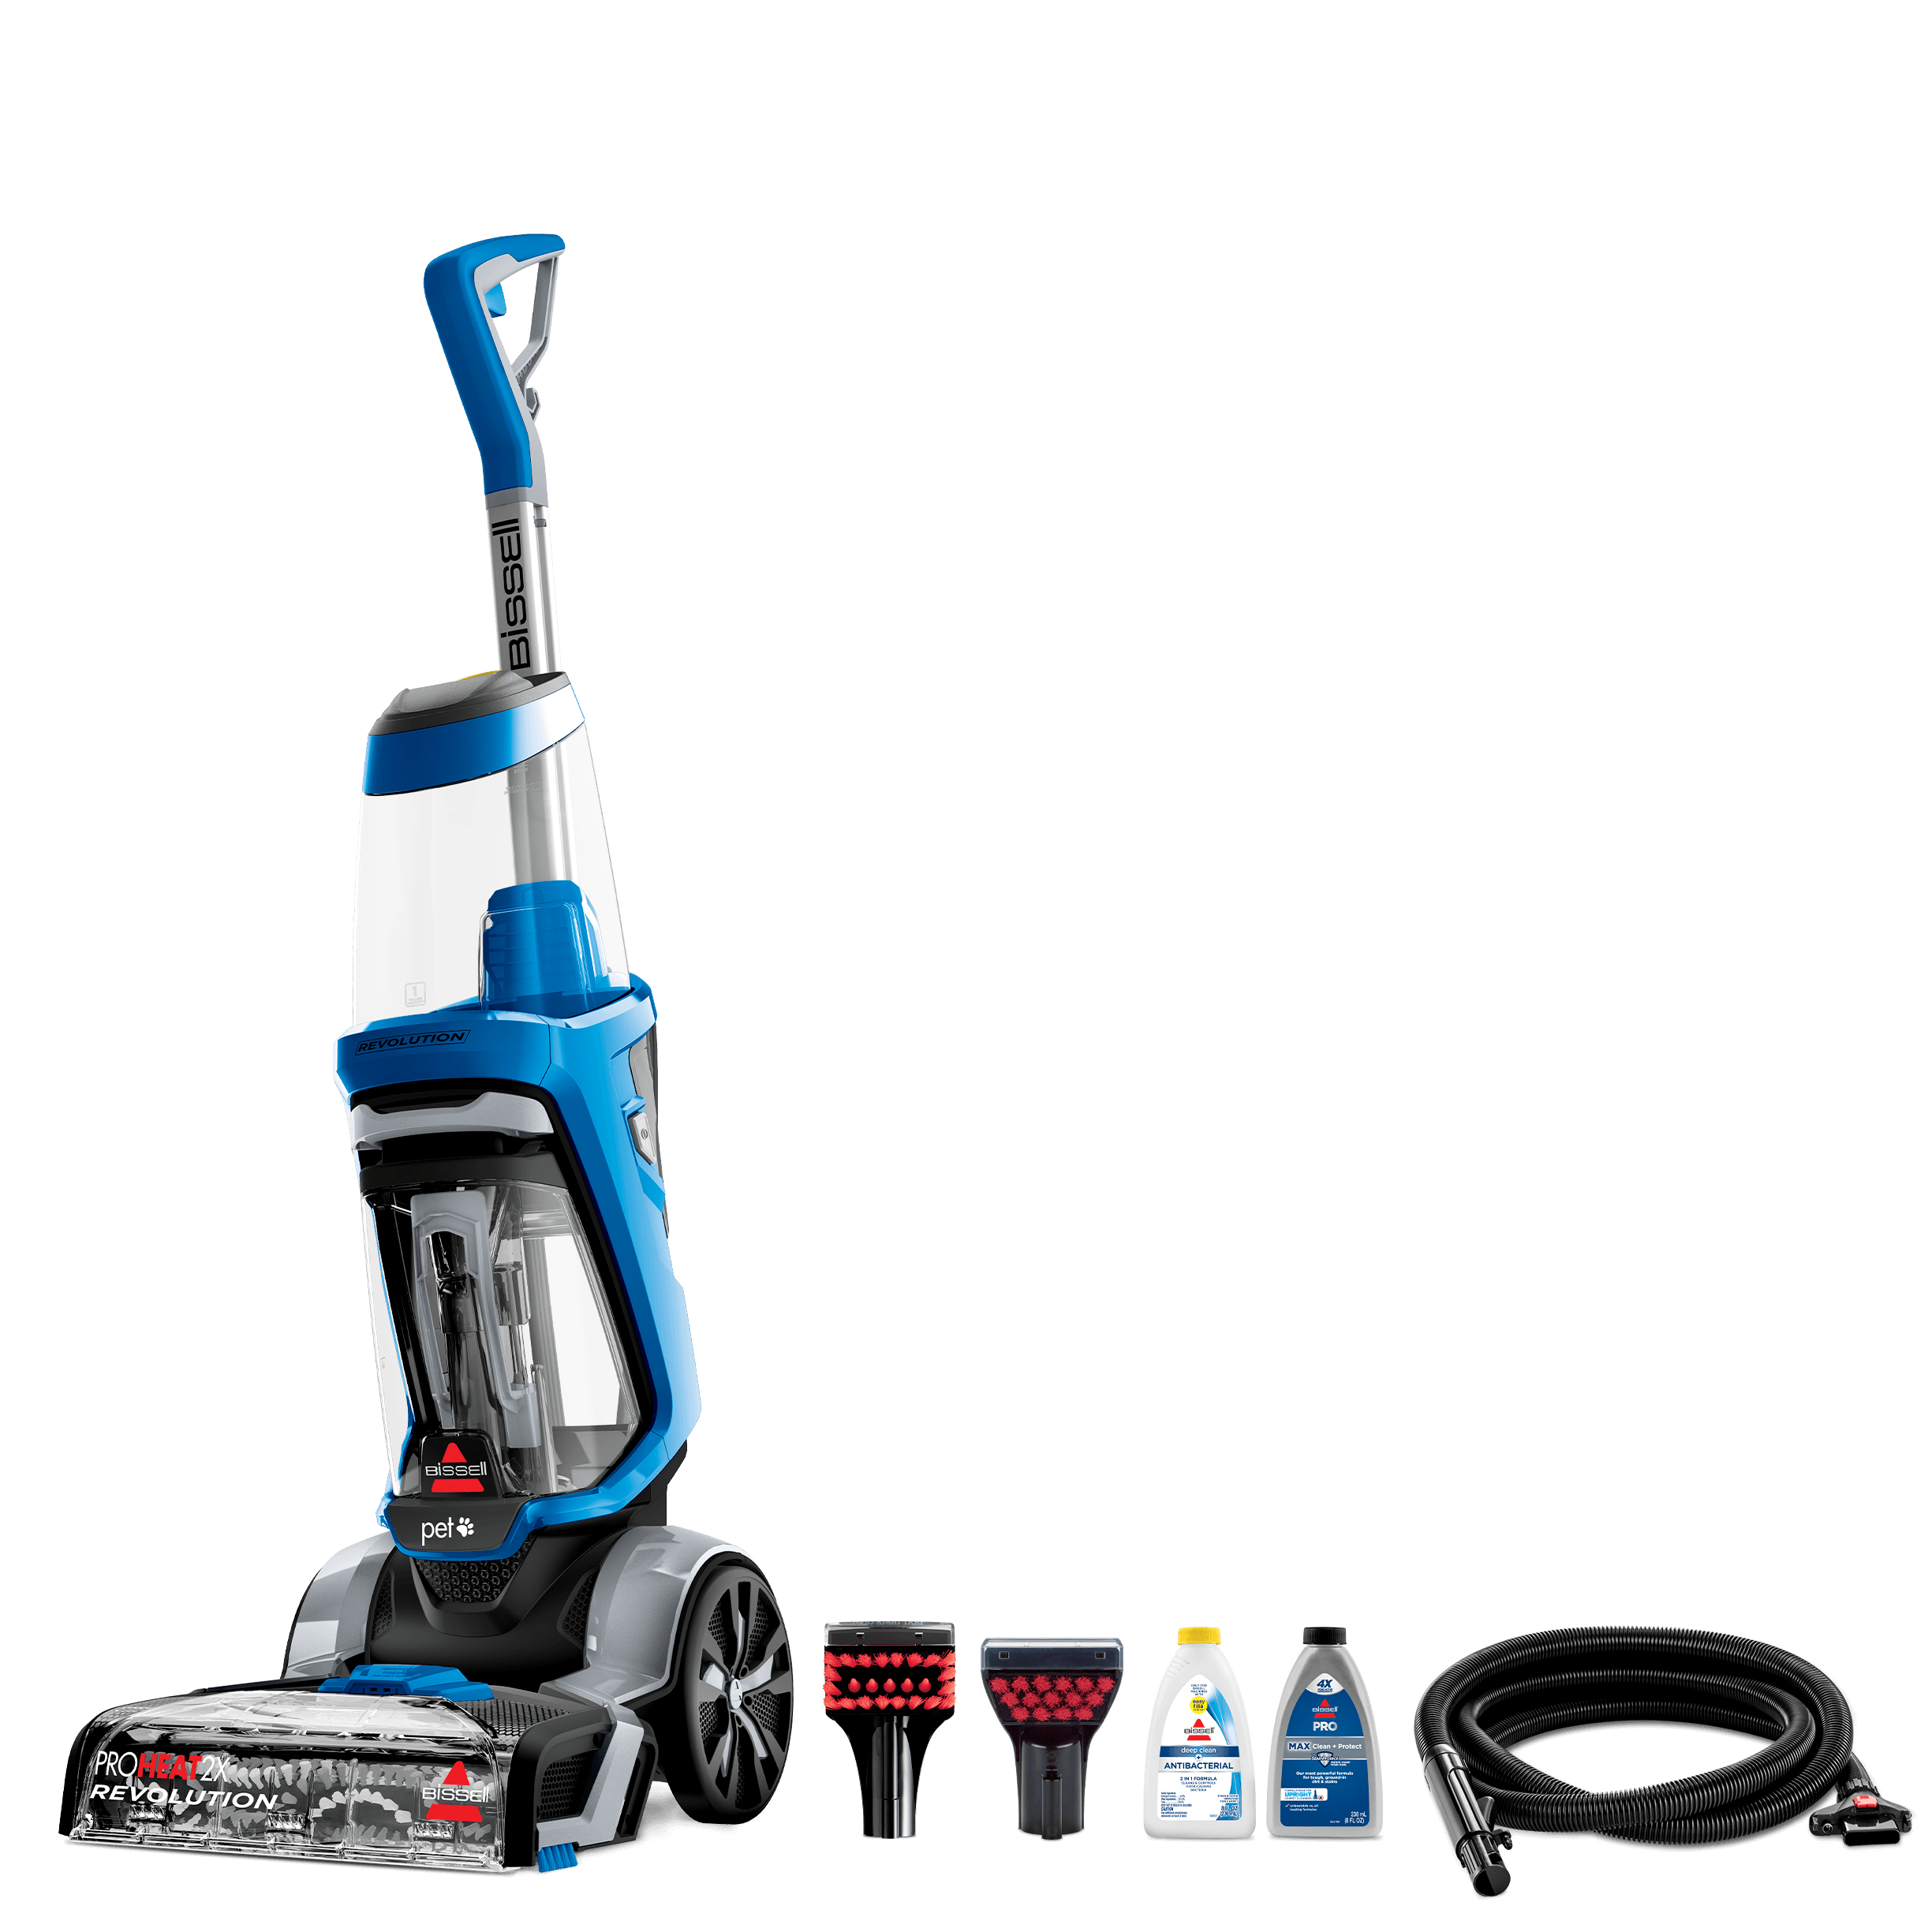 How to Use a Bissell Revolution Carpet Cleaner: Pro Tips!